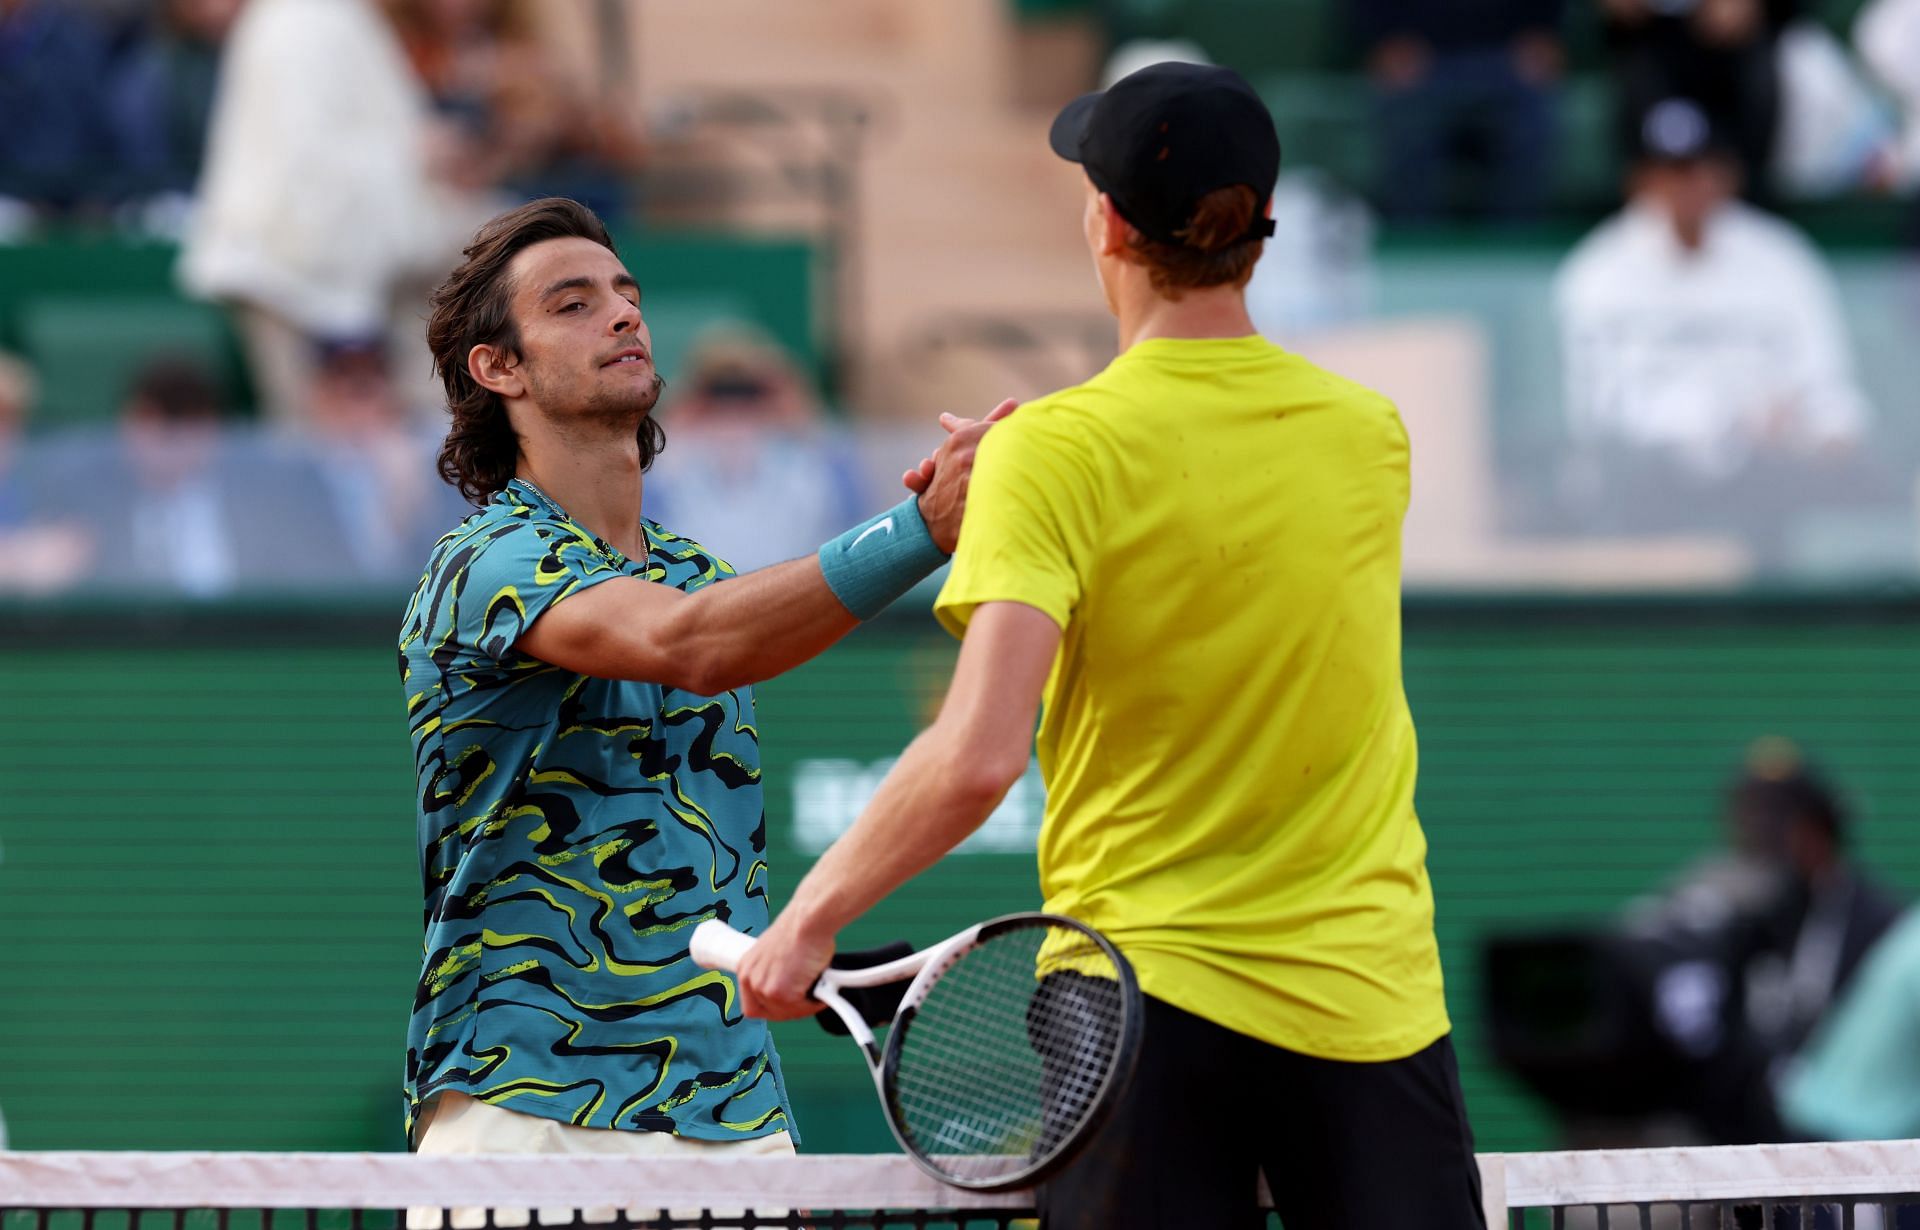 Sinner defeated Musetti at Rolex Monte-Carlo Masters